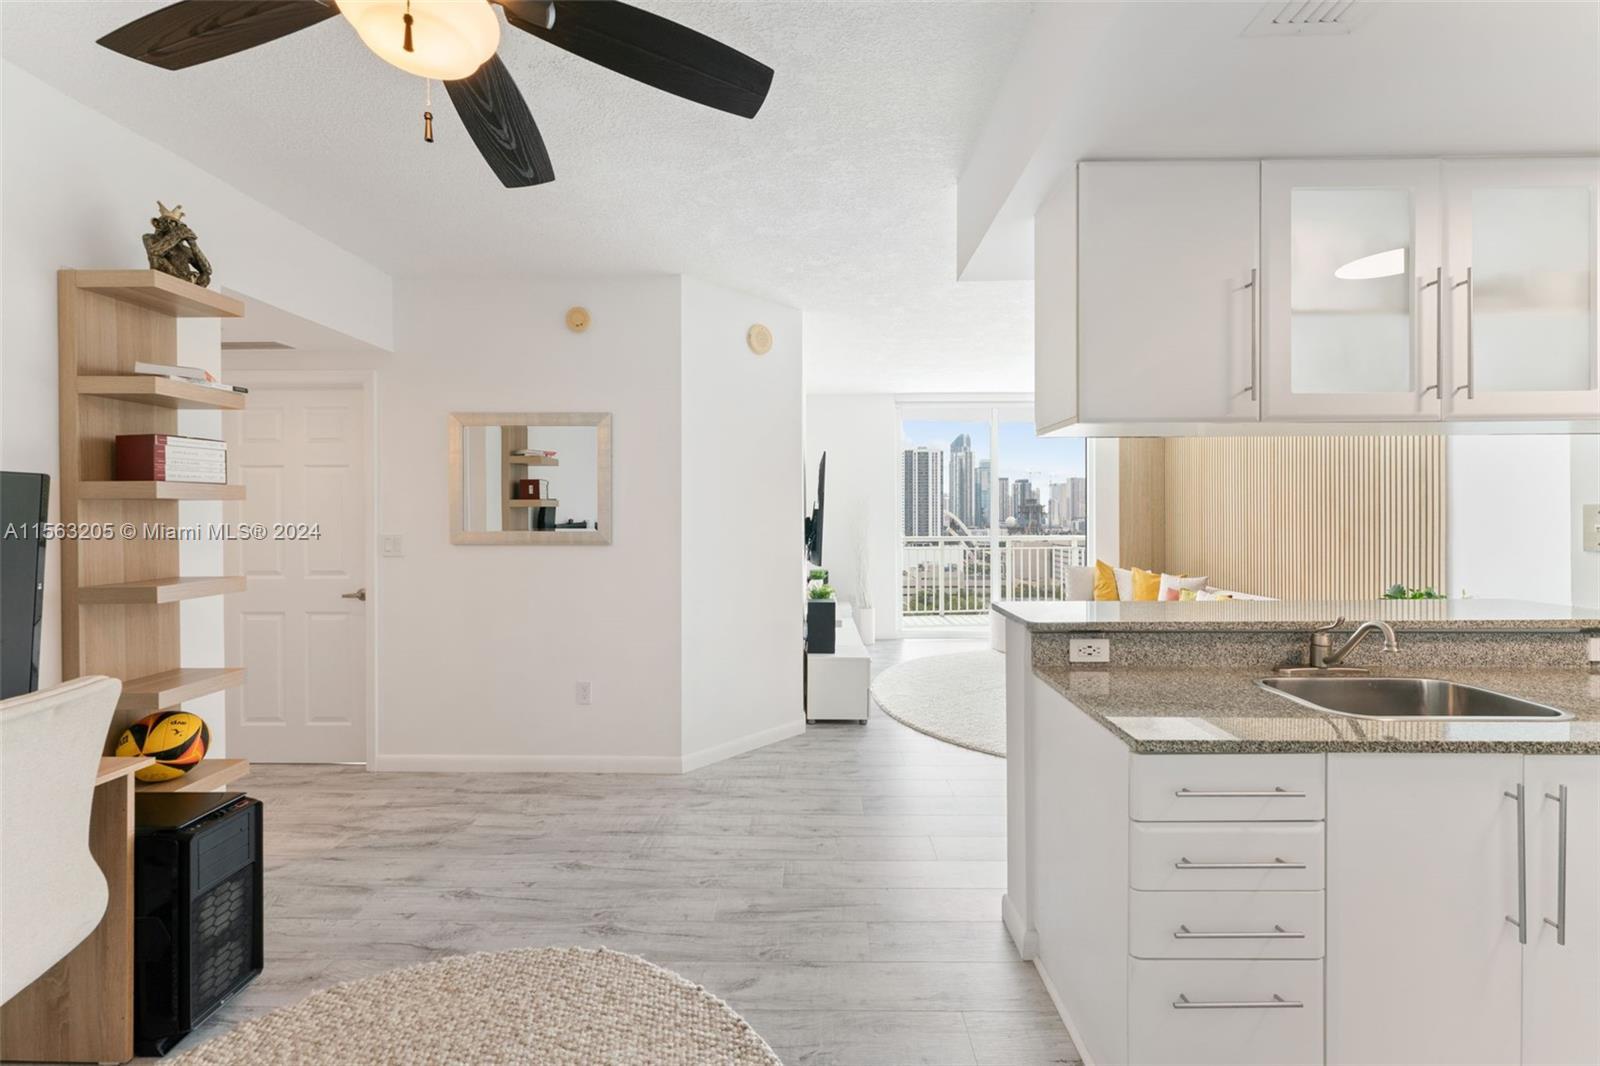 Completely remodeled penthouse unit in Edgewater, Miami, featuring an open balcony with stunning cit